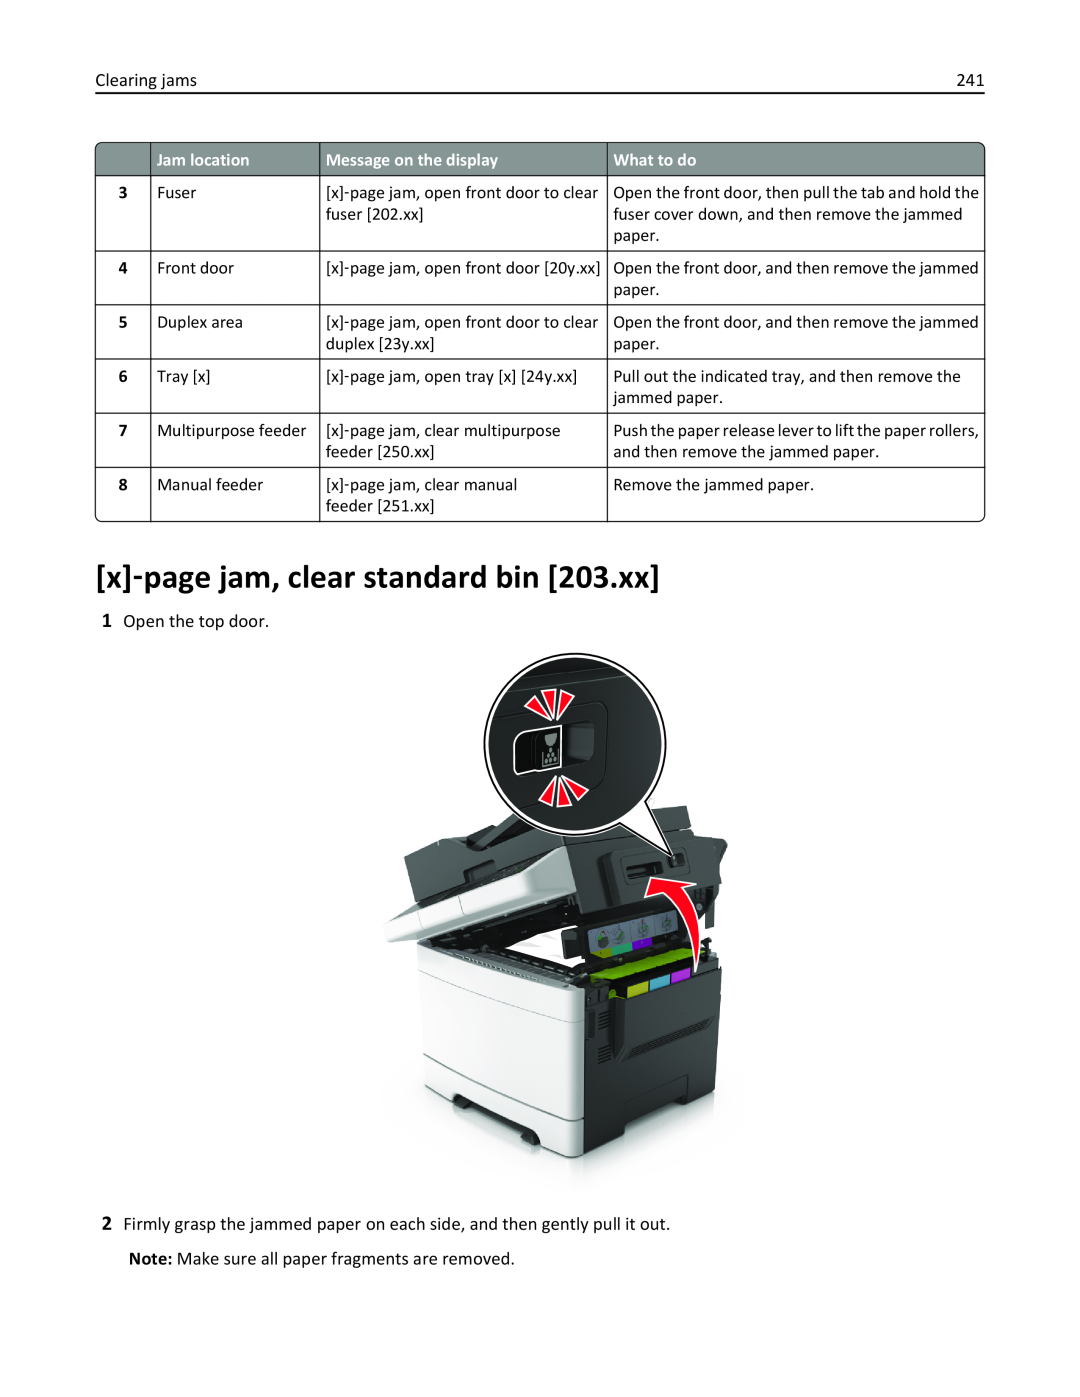 Lexmark 436 manual x‑page jam, clear standard bin, Push the paper release lever to lift the paper rollers 